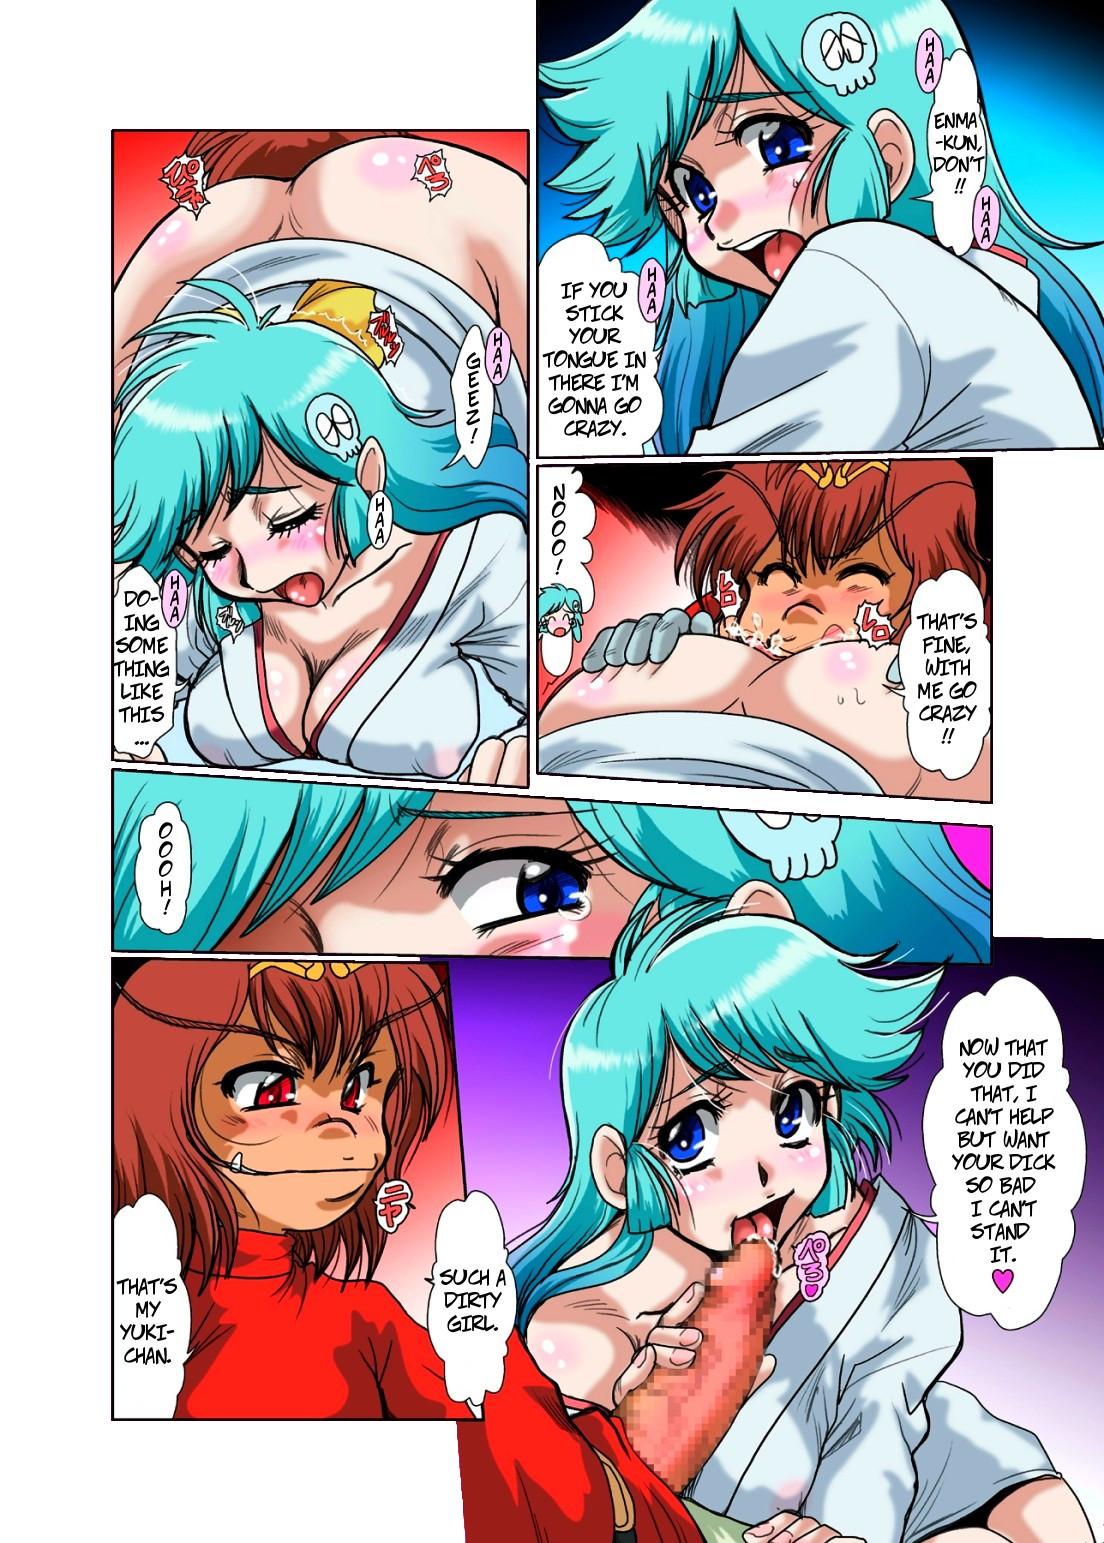 Blowjob Something Sexy This Way Comes - Dororon enma-kun Picked Up - Page 5